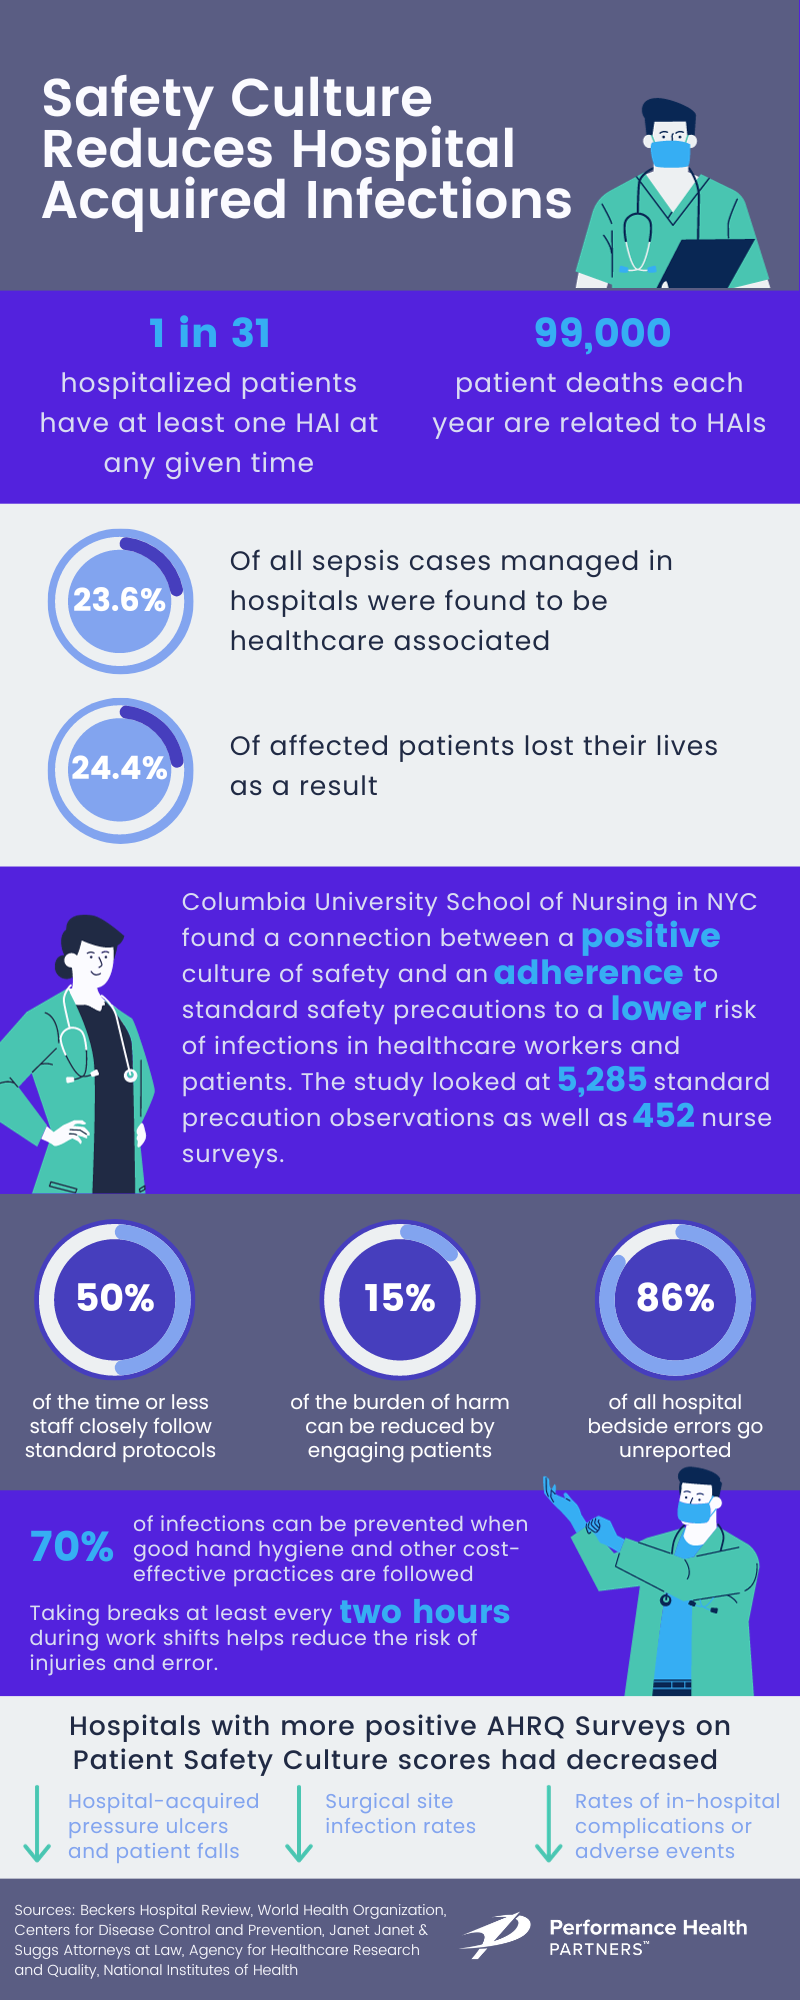 Safety Culture in Healthcare Reduces Hospital Acquired Infections  Infographic